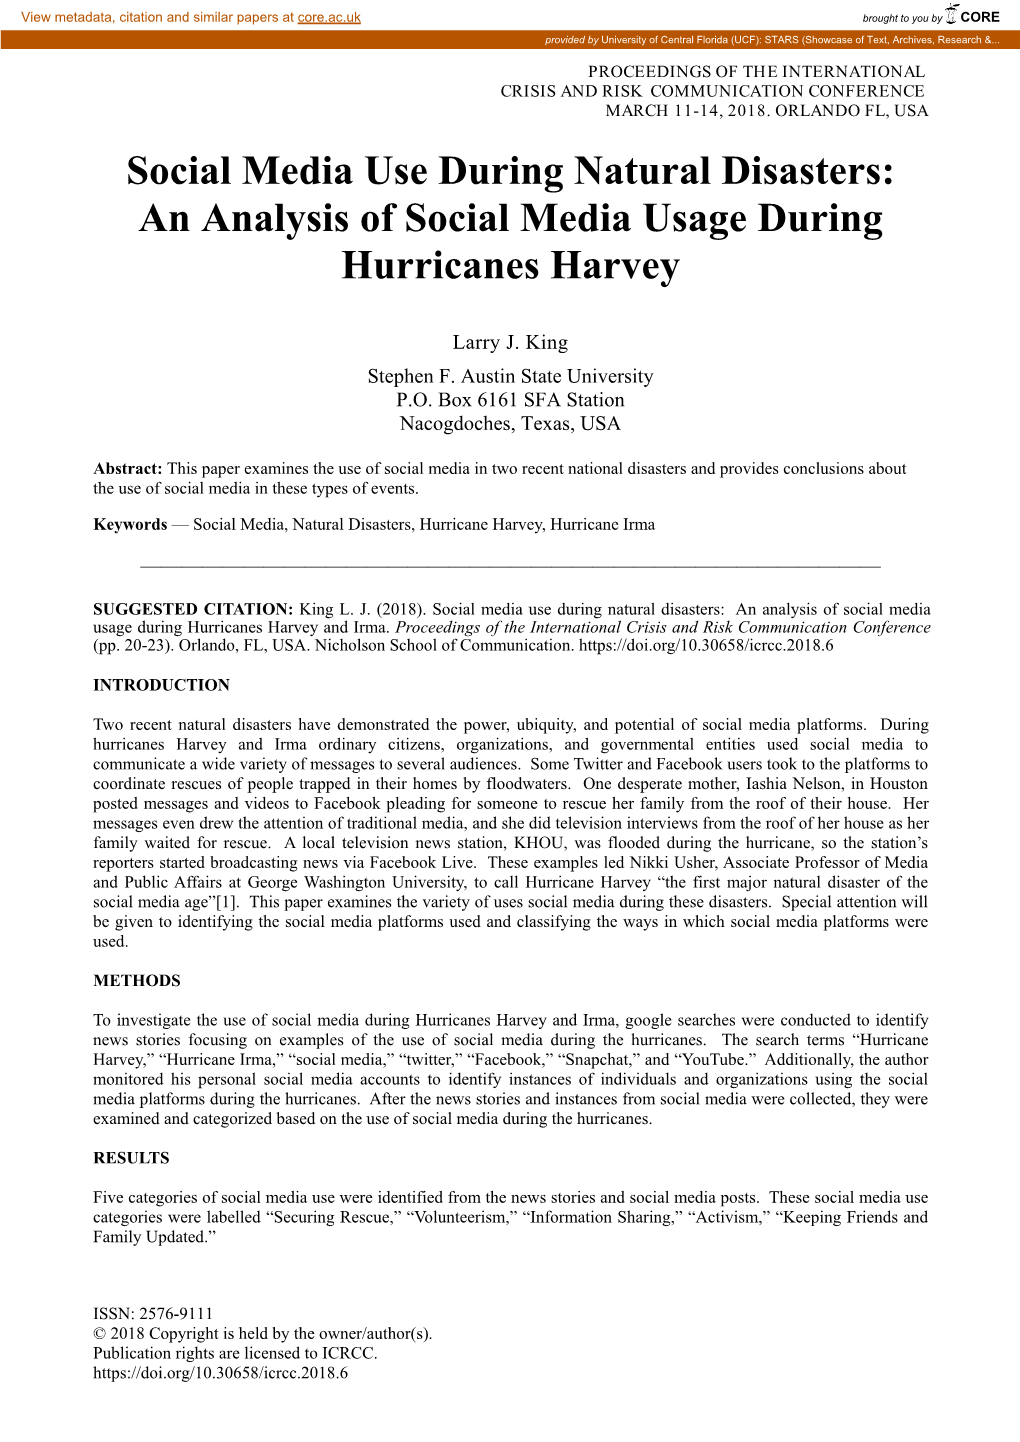 An Analysis of Social Media Usage During Hurricanes Harvey